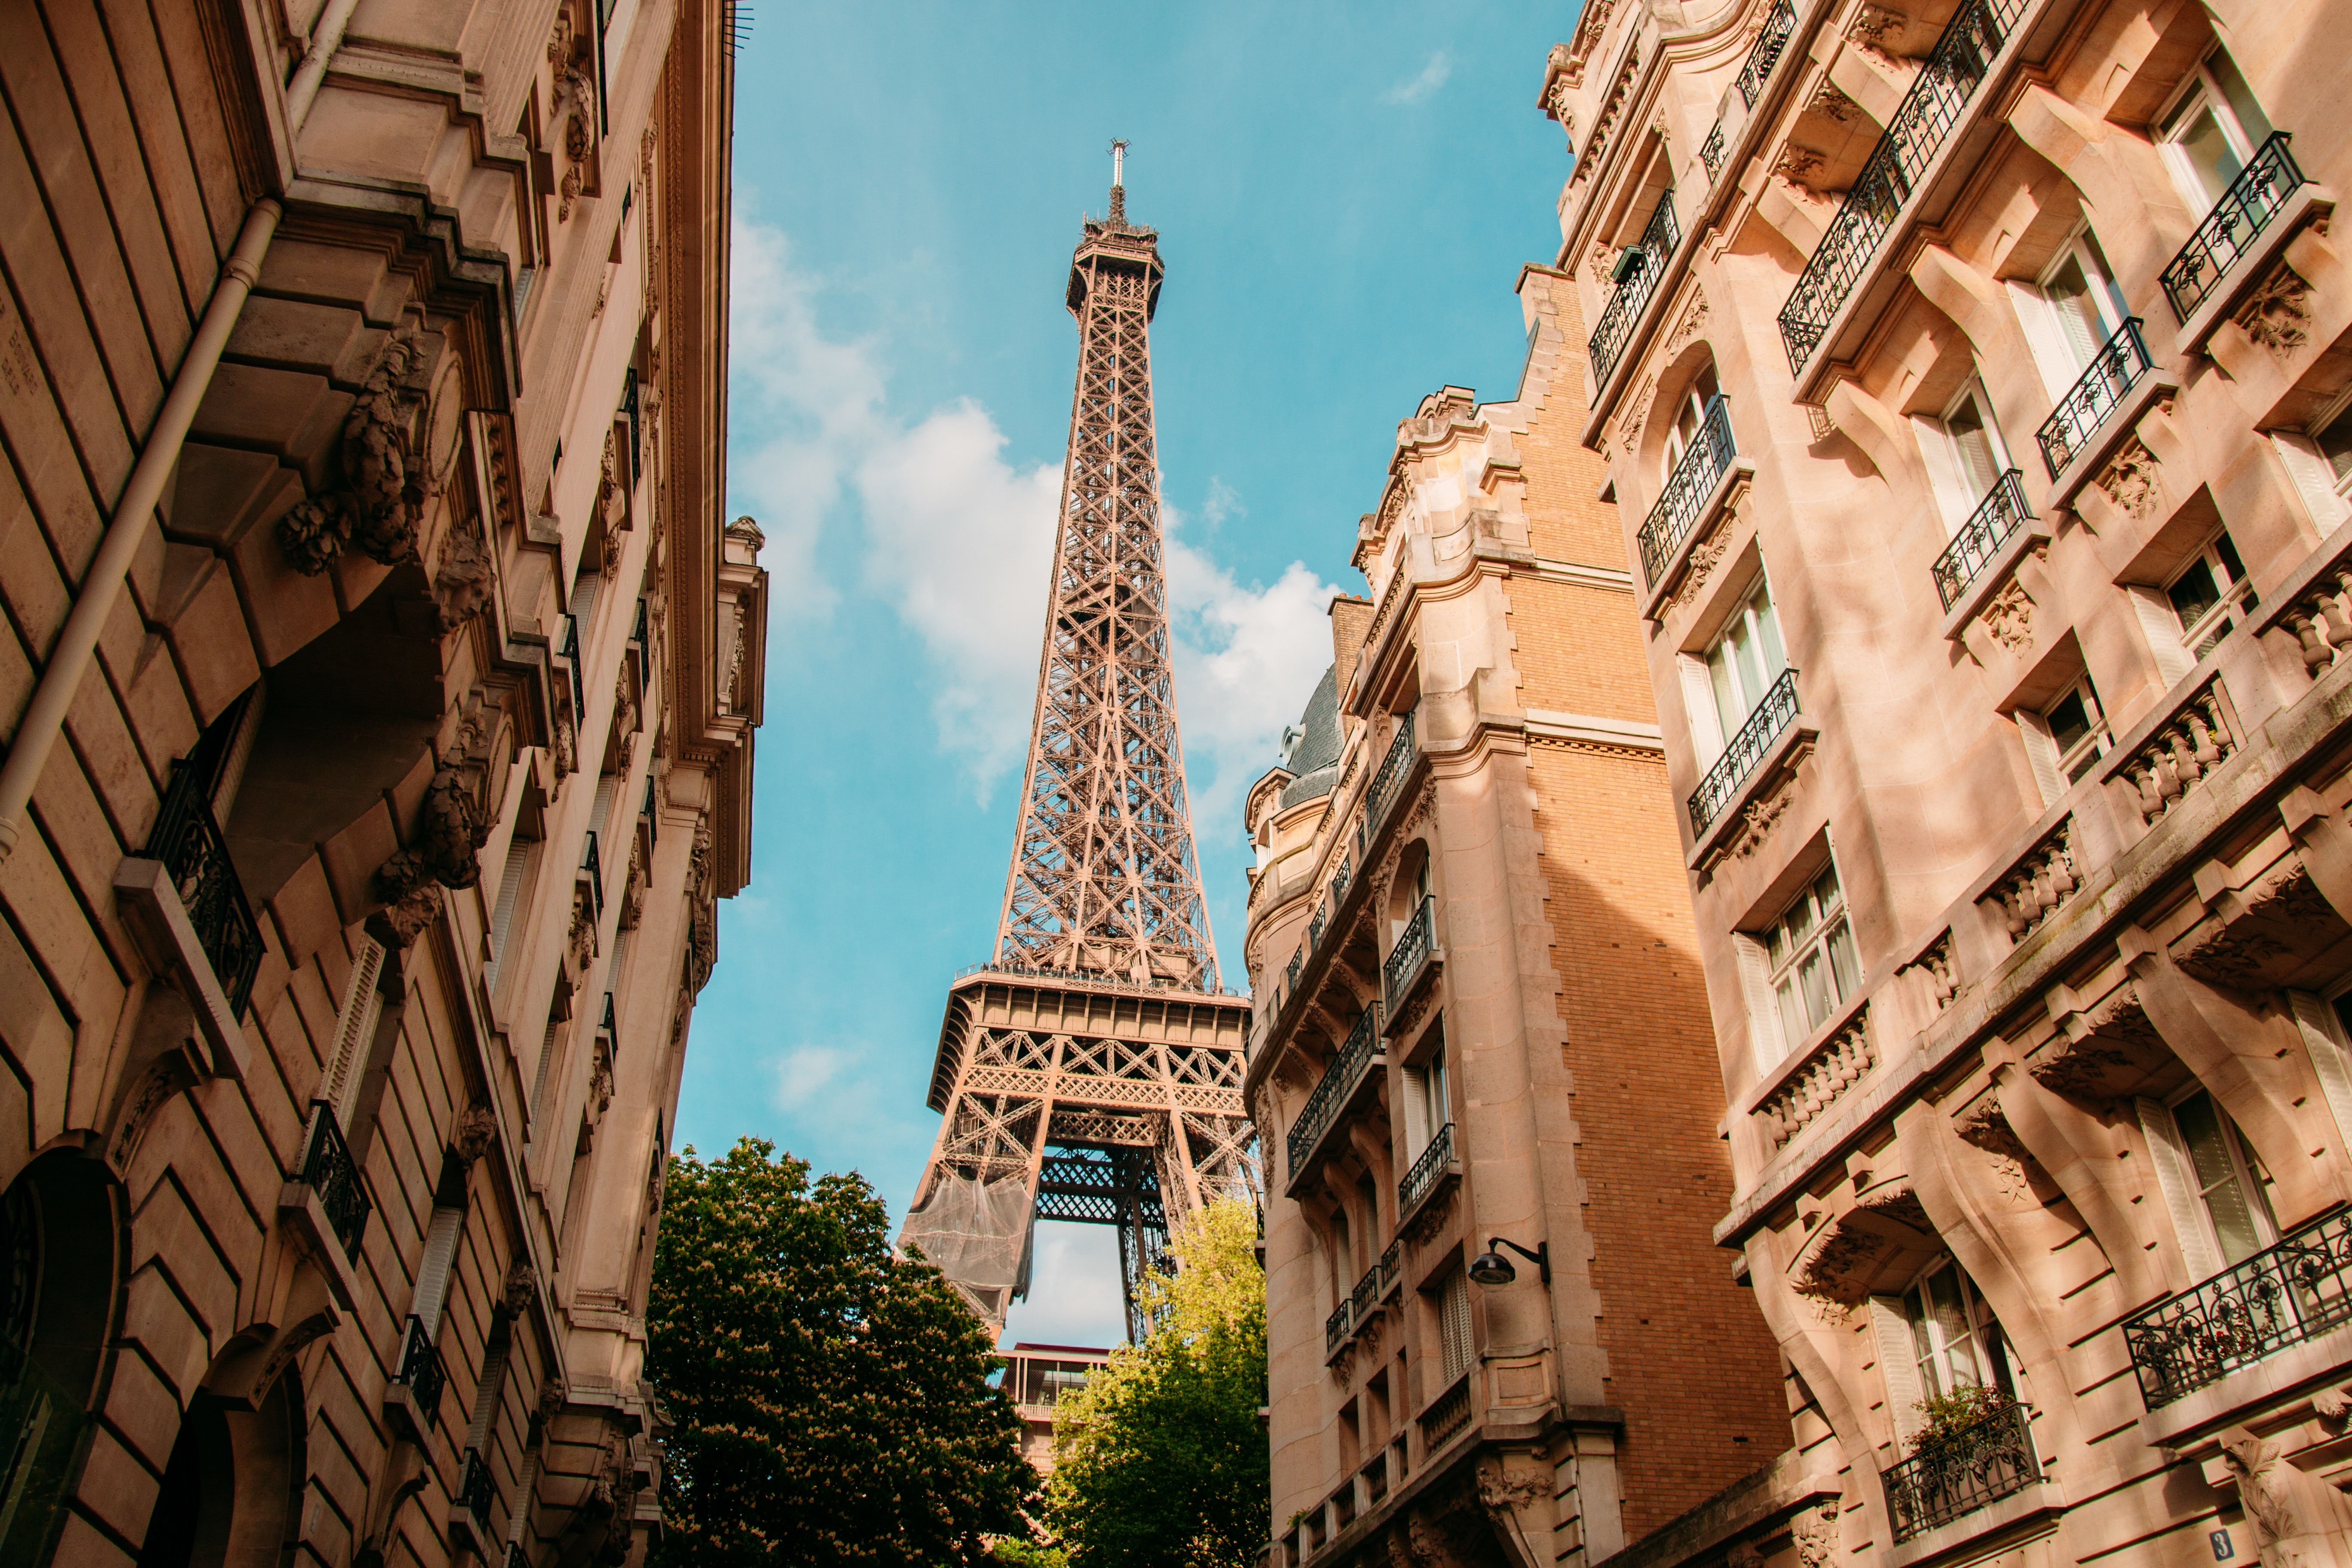 The Eiffel Tower behind the beautiful buildings of Paris